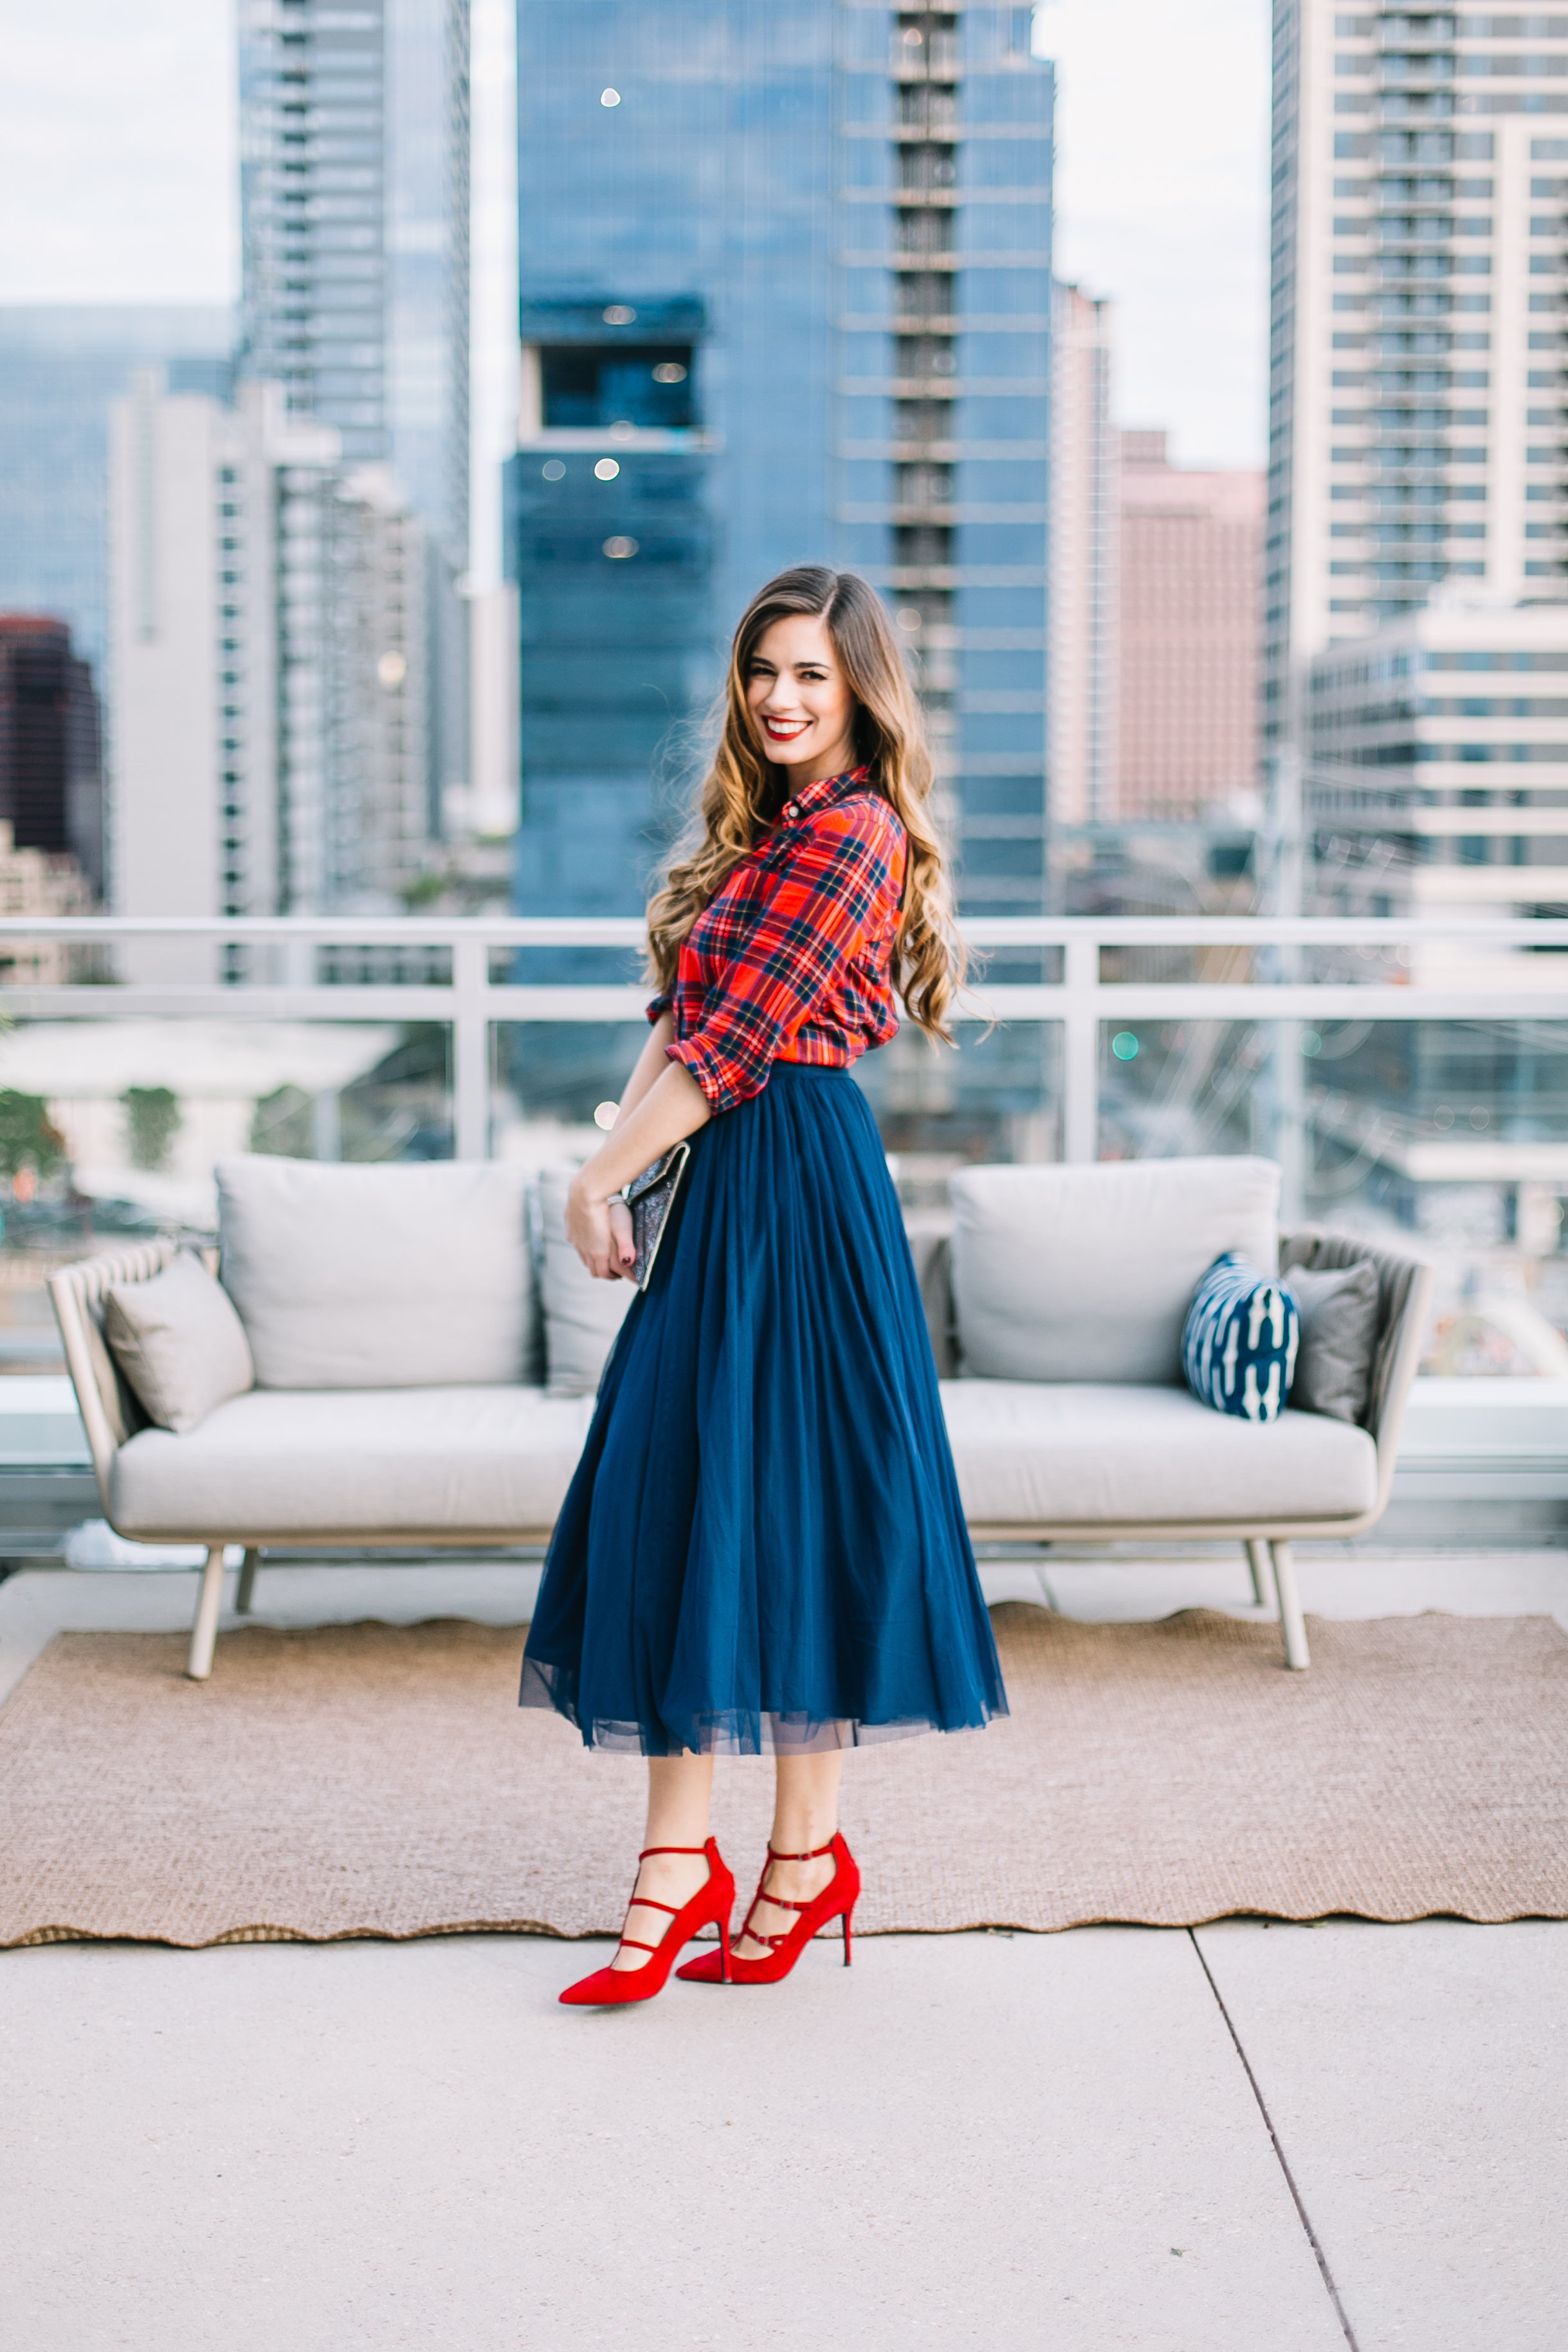 by-hilary-rose-blue-tulle-skirt-red-plaid-shirt-red-heels